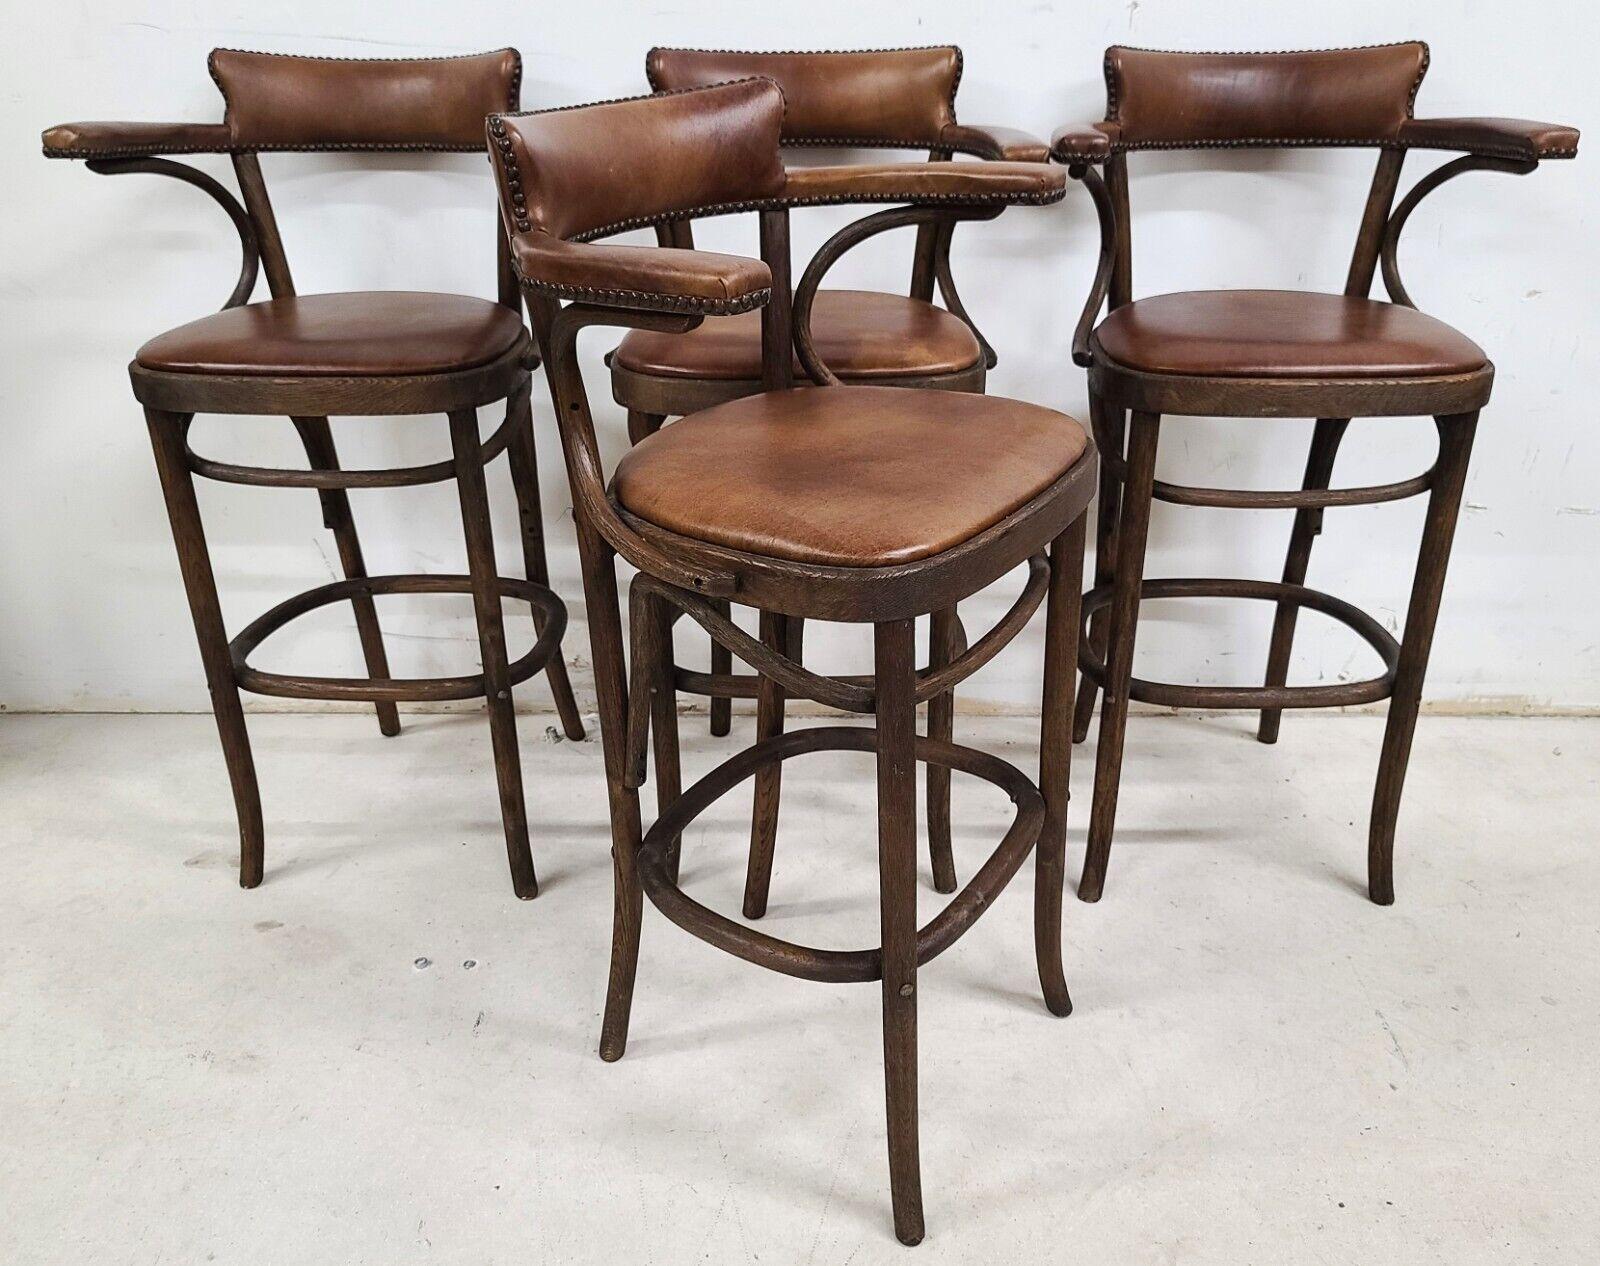 Offering one of our recent palm beach estate fine furniture acquisitions of a
Set of (4) restoration hardware leather Bistro Thonet style barstools
Featuring brass nail head trim throughout.

Approximate measurements in inches
43